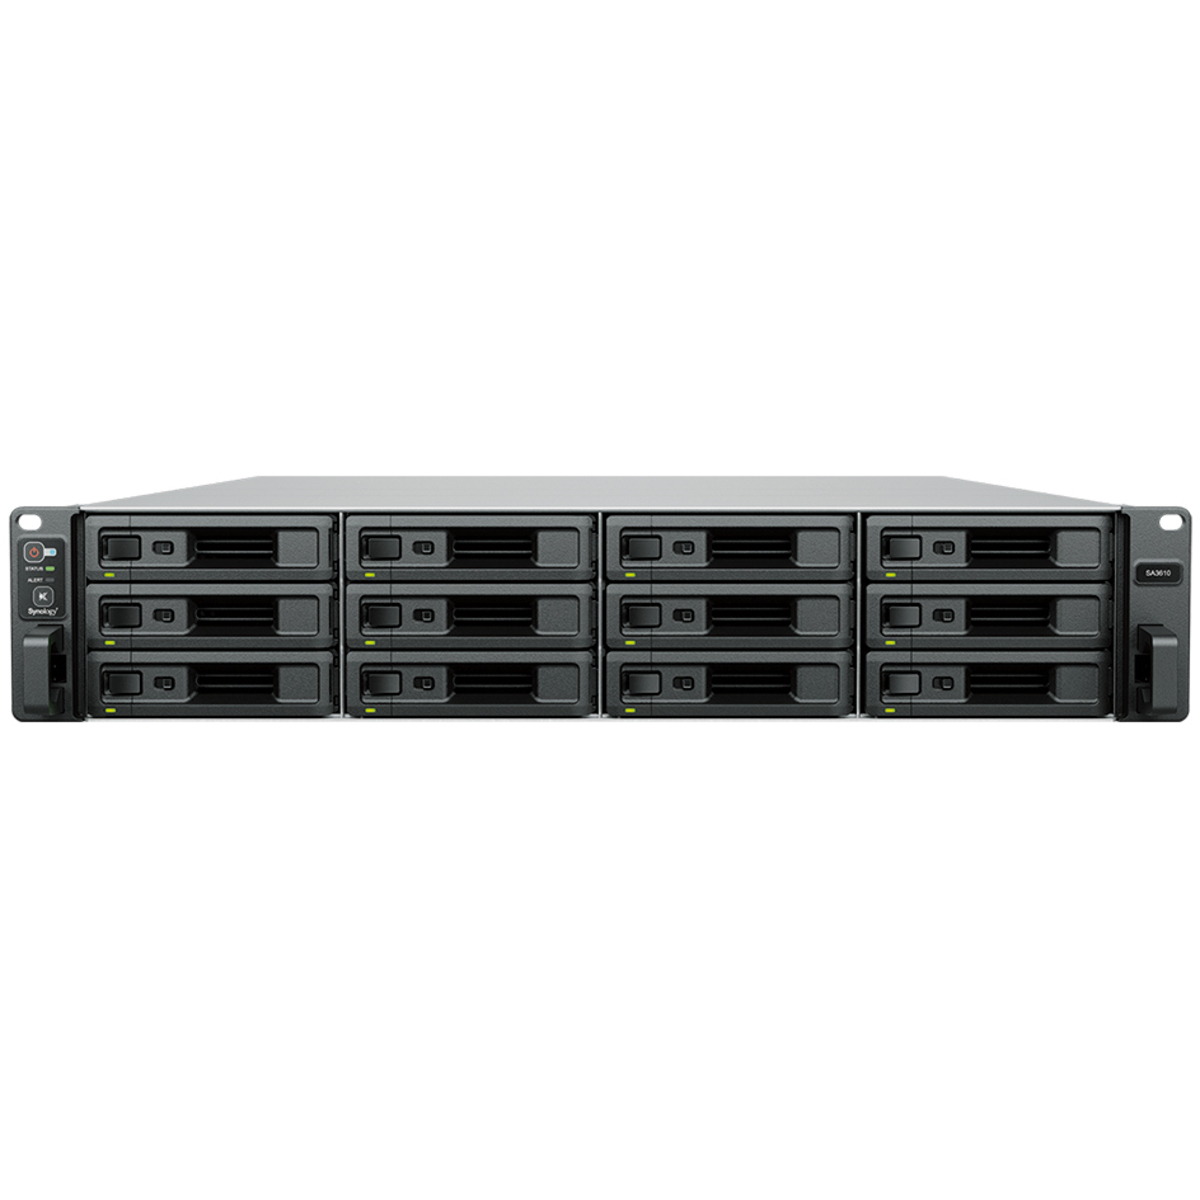 Synology RackStation SA3410 176tb 12-Bay RackMount Large Business / Enterprise NAS - Network Attached Storage Device 11x16tb Seagate IronWolf ST16000VN001 3.5 7200rpm SATA 6Gb/s HDD NAS Class Drives Installed - Burn-In Tested RackStation SA3410